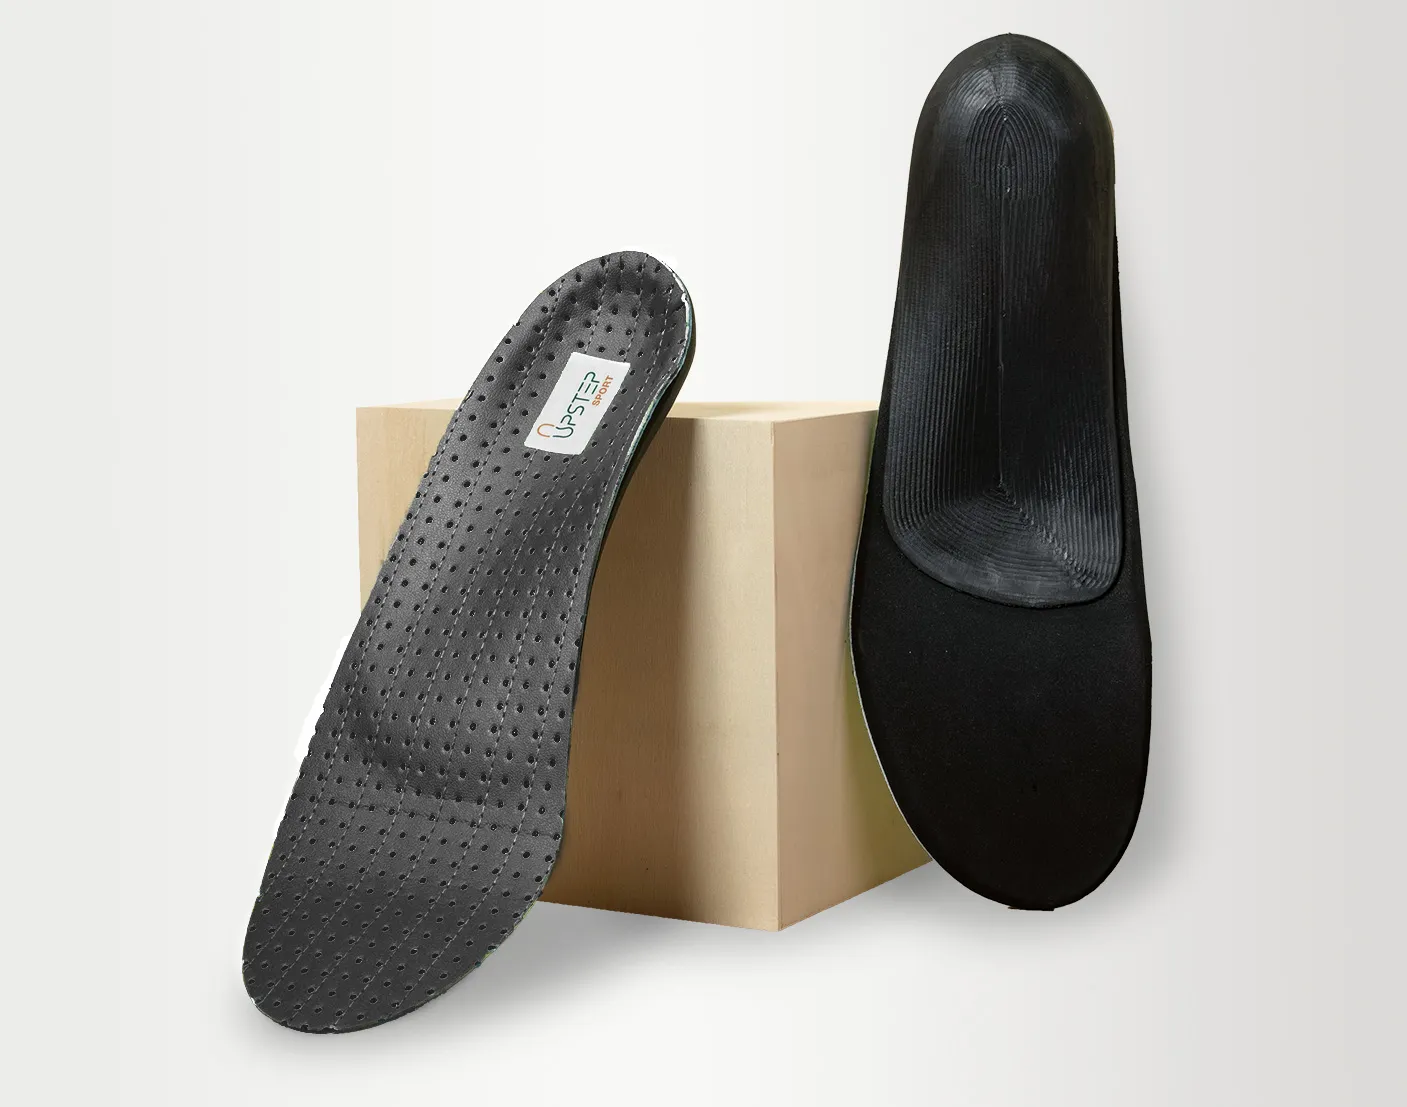 Upstep's On My Feet All Day shoe orthotics presented out of the shipping box.